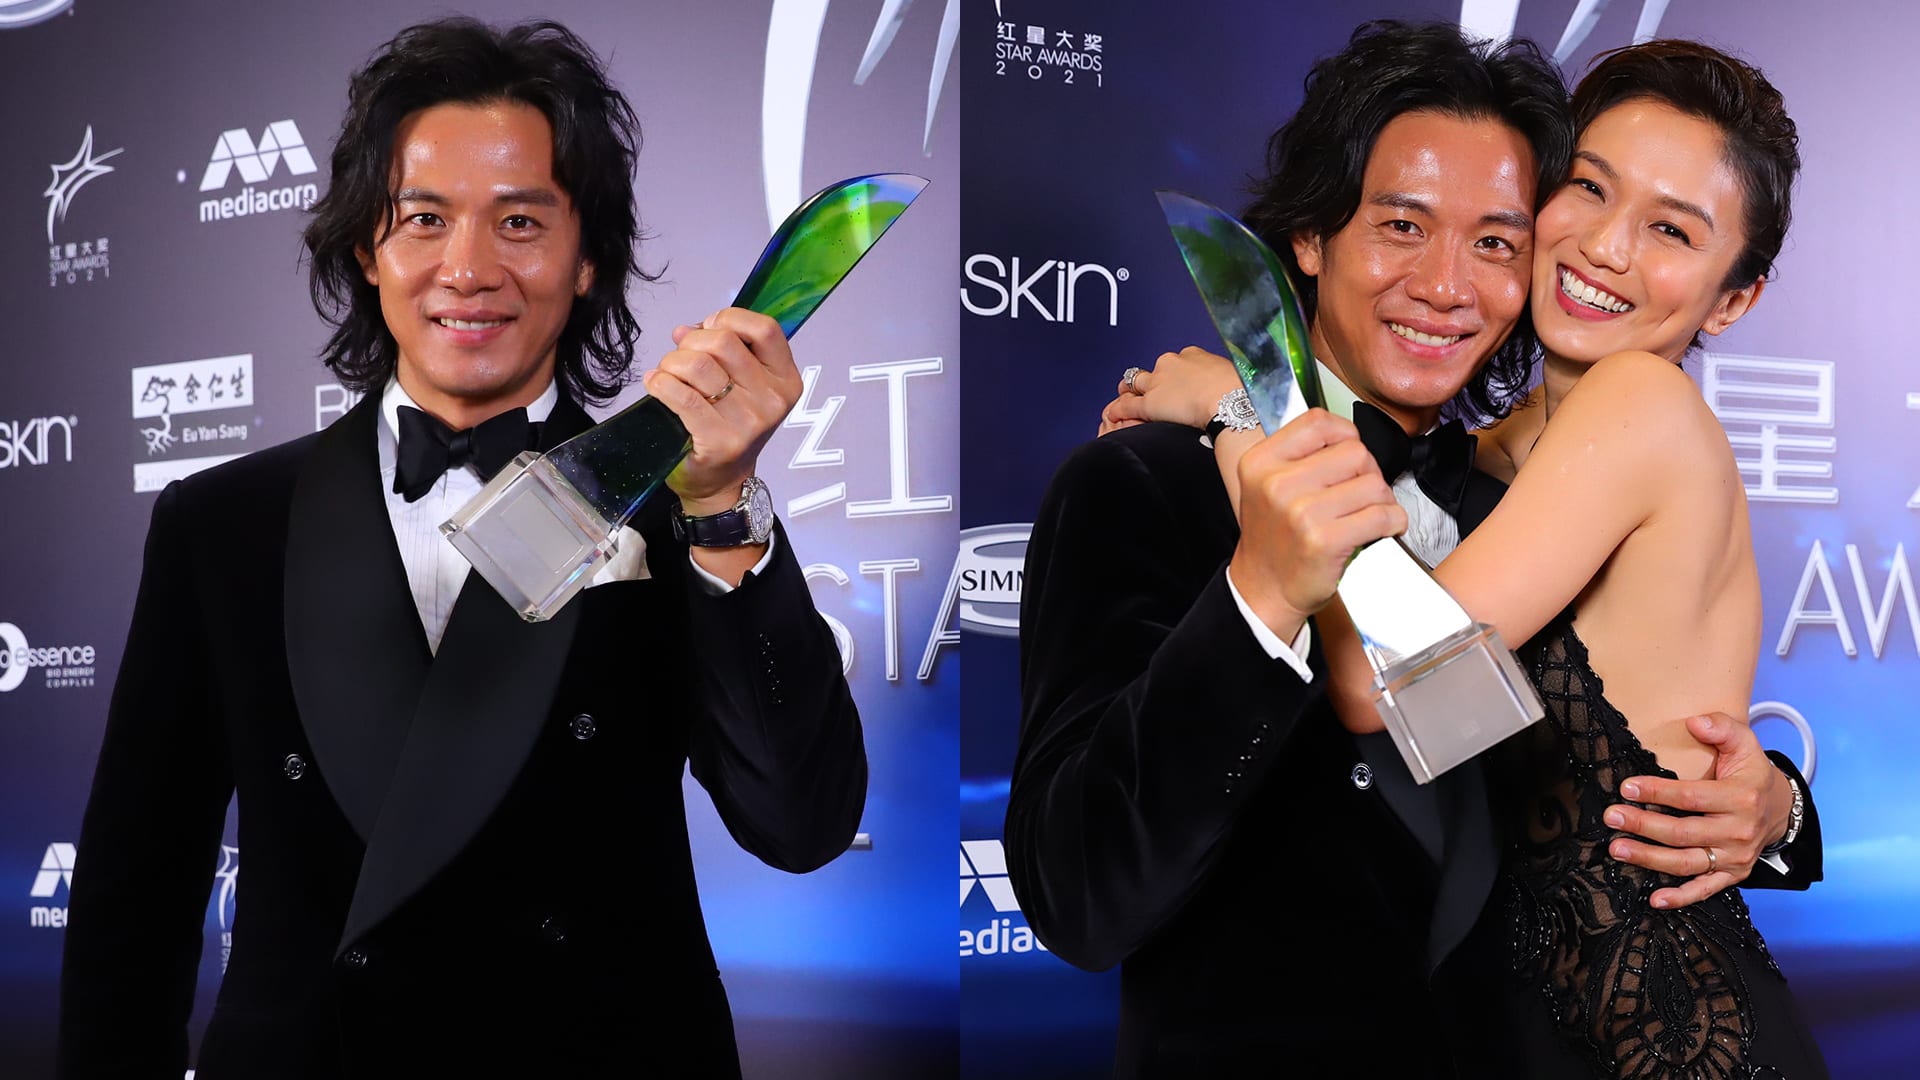 Qi Yuwu Won’t Display His Star Awards Best Actor Trophy ‘Cos He Wants To Forget About His Win